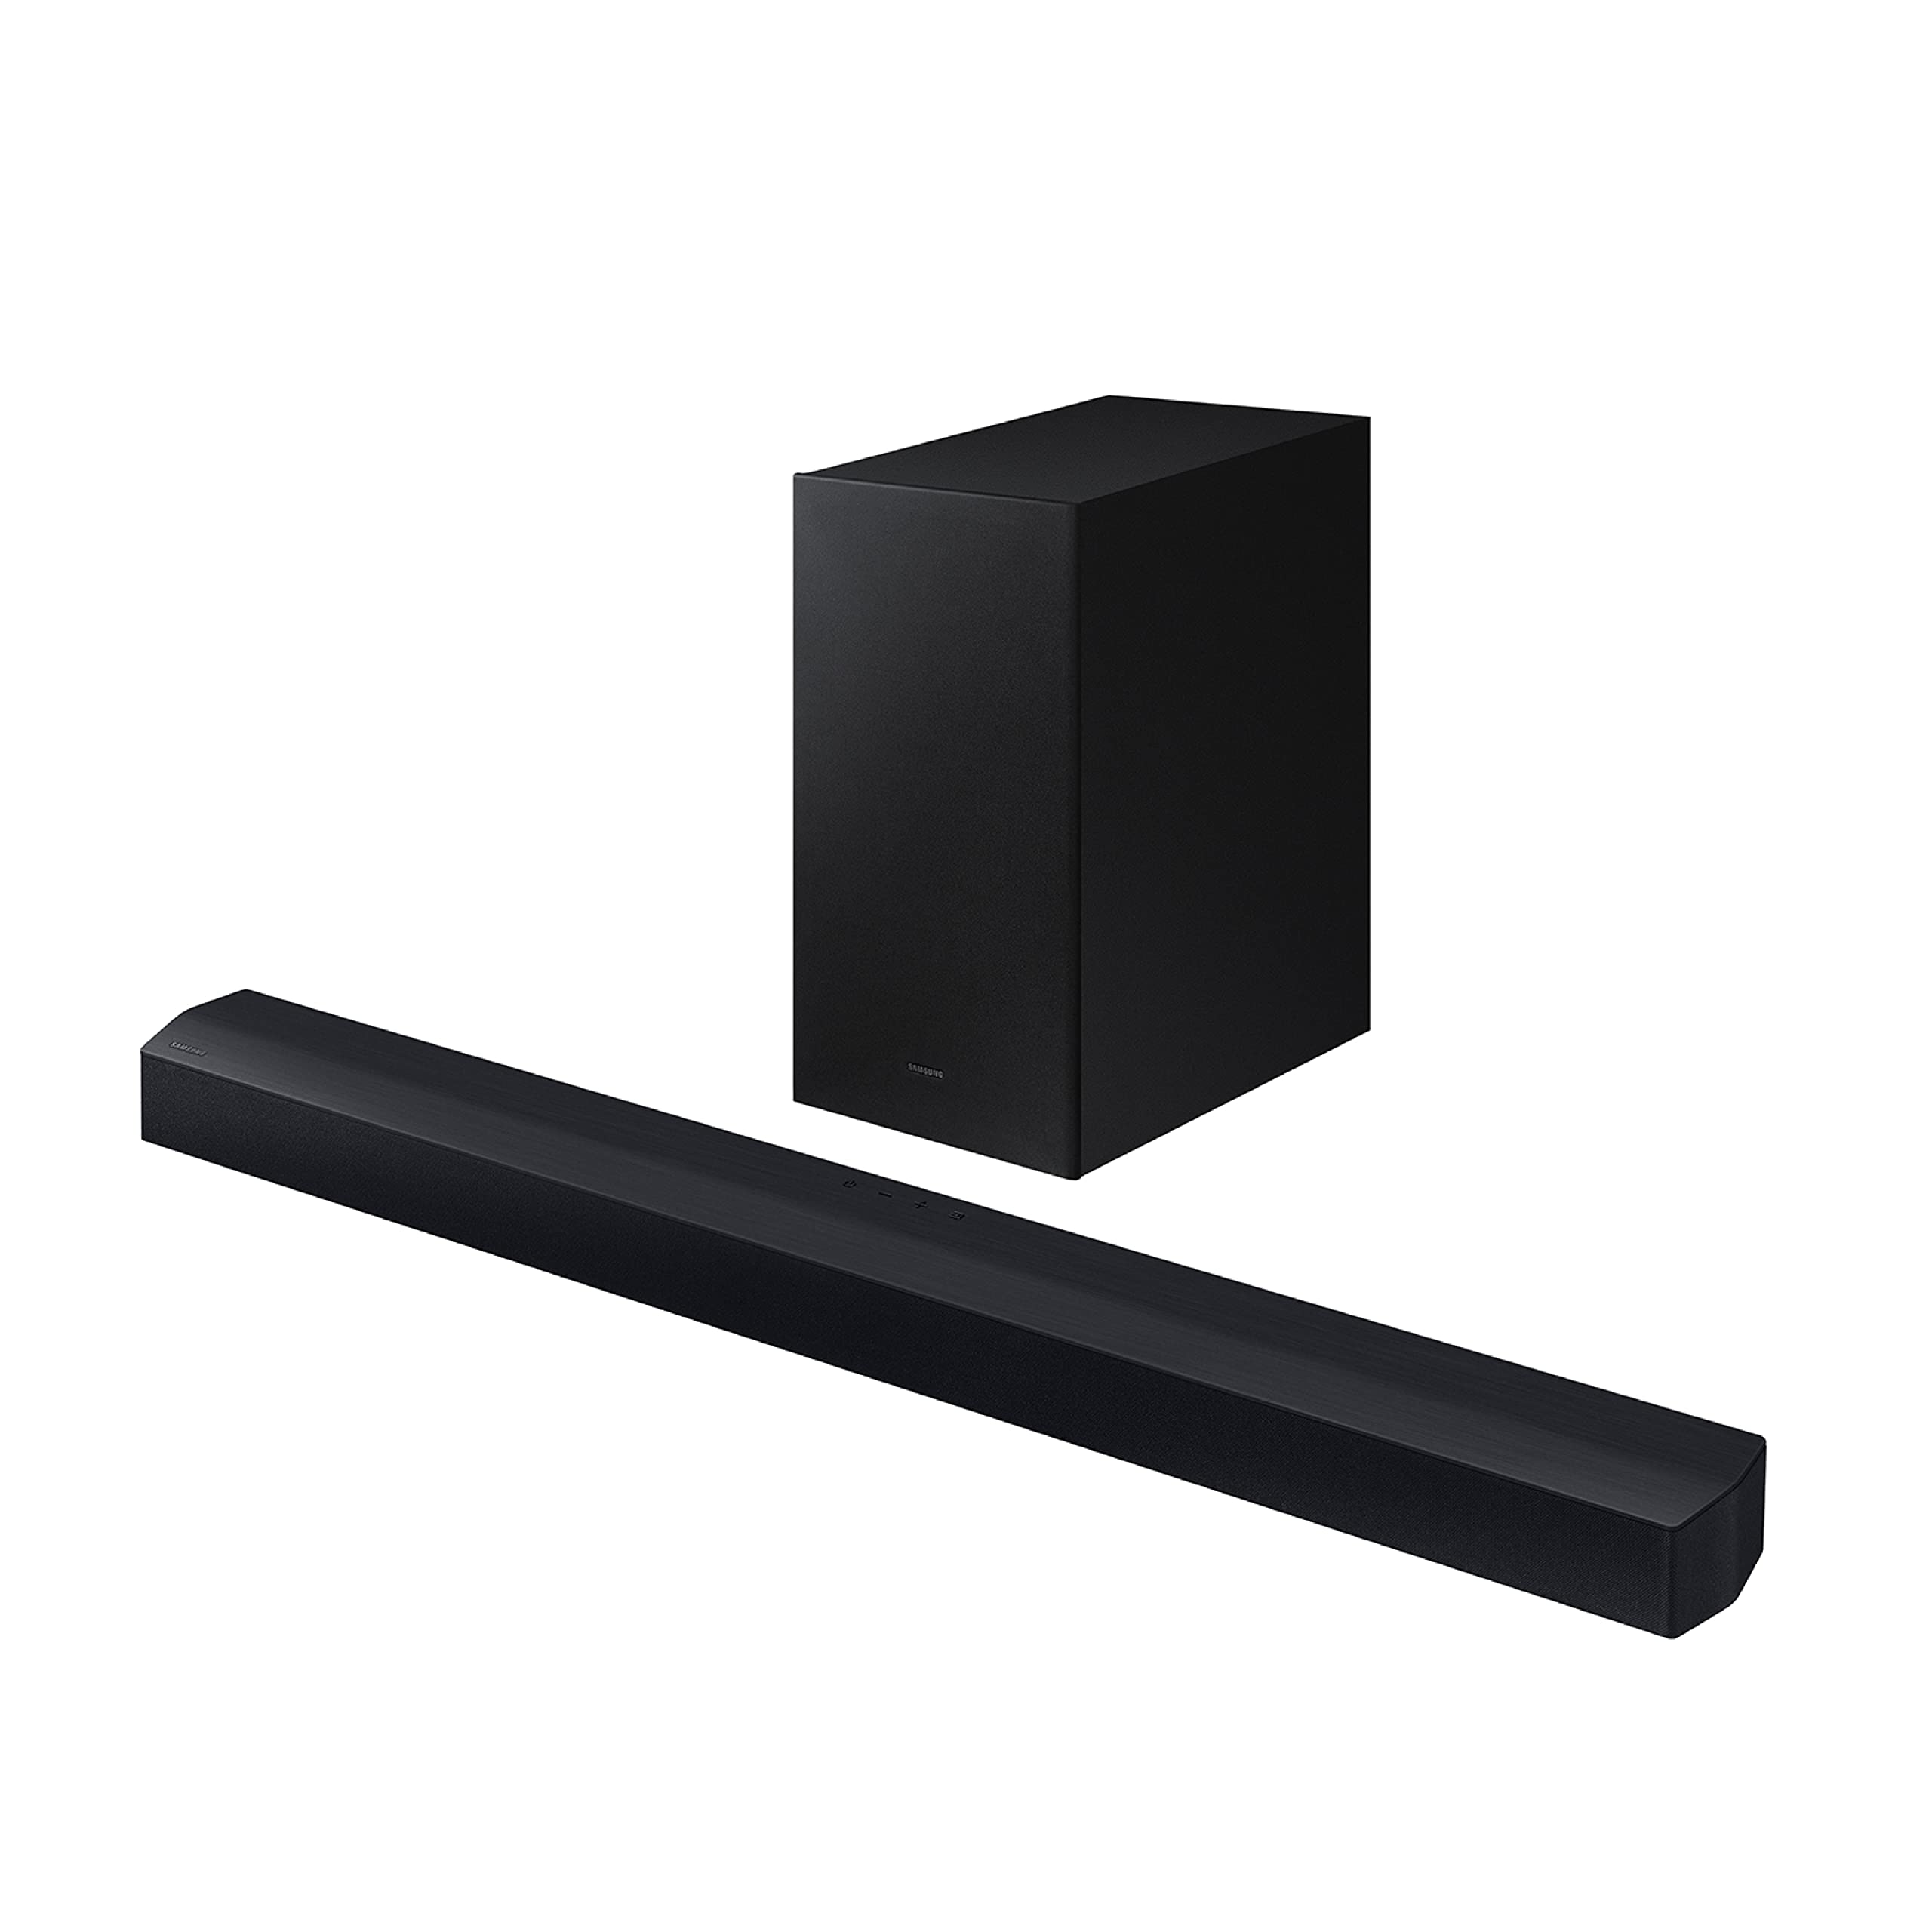 SAMSUNG HW-C450 2.1ch Soundbar w/DTS Virtual X, Subwoofer Included, Bass Boost, Adaptive Sound Lite, Game Mode, Bluetooth, Wireless Surround Sound Compatible (Newest Model),Black